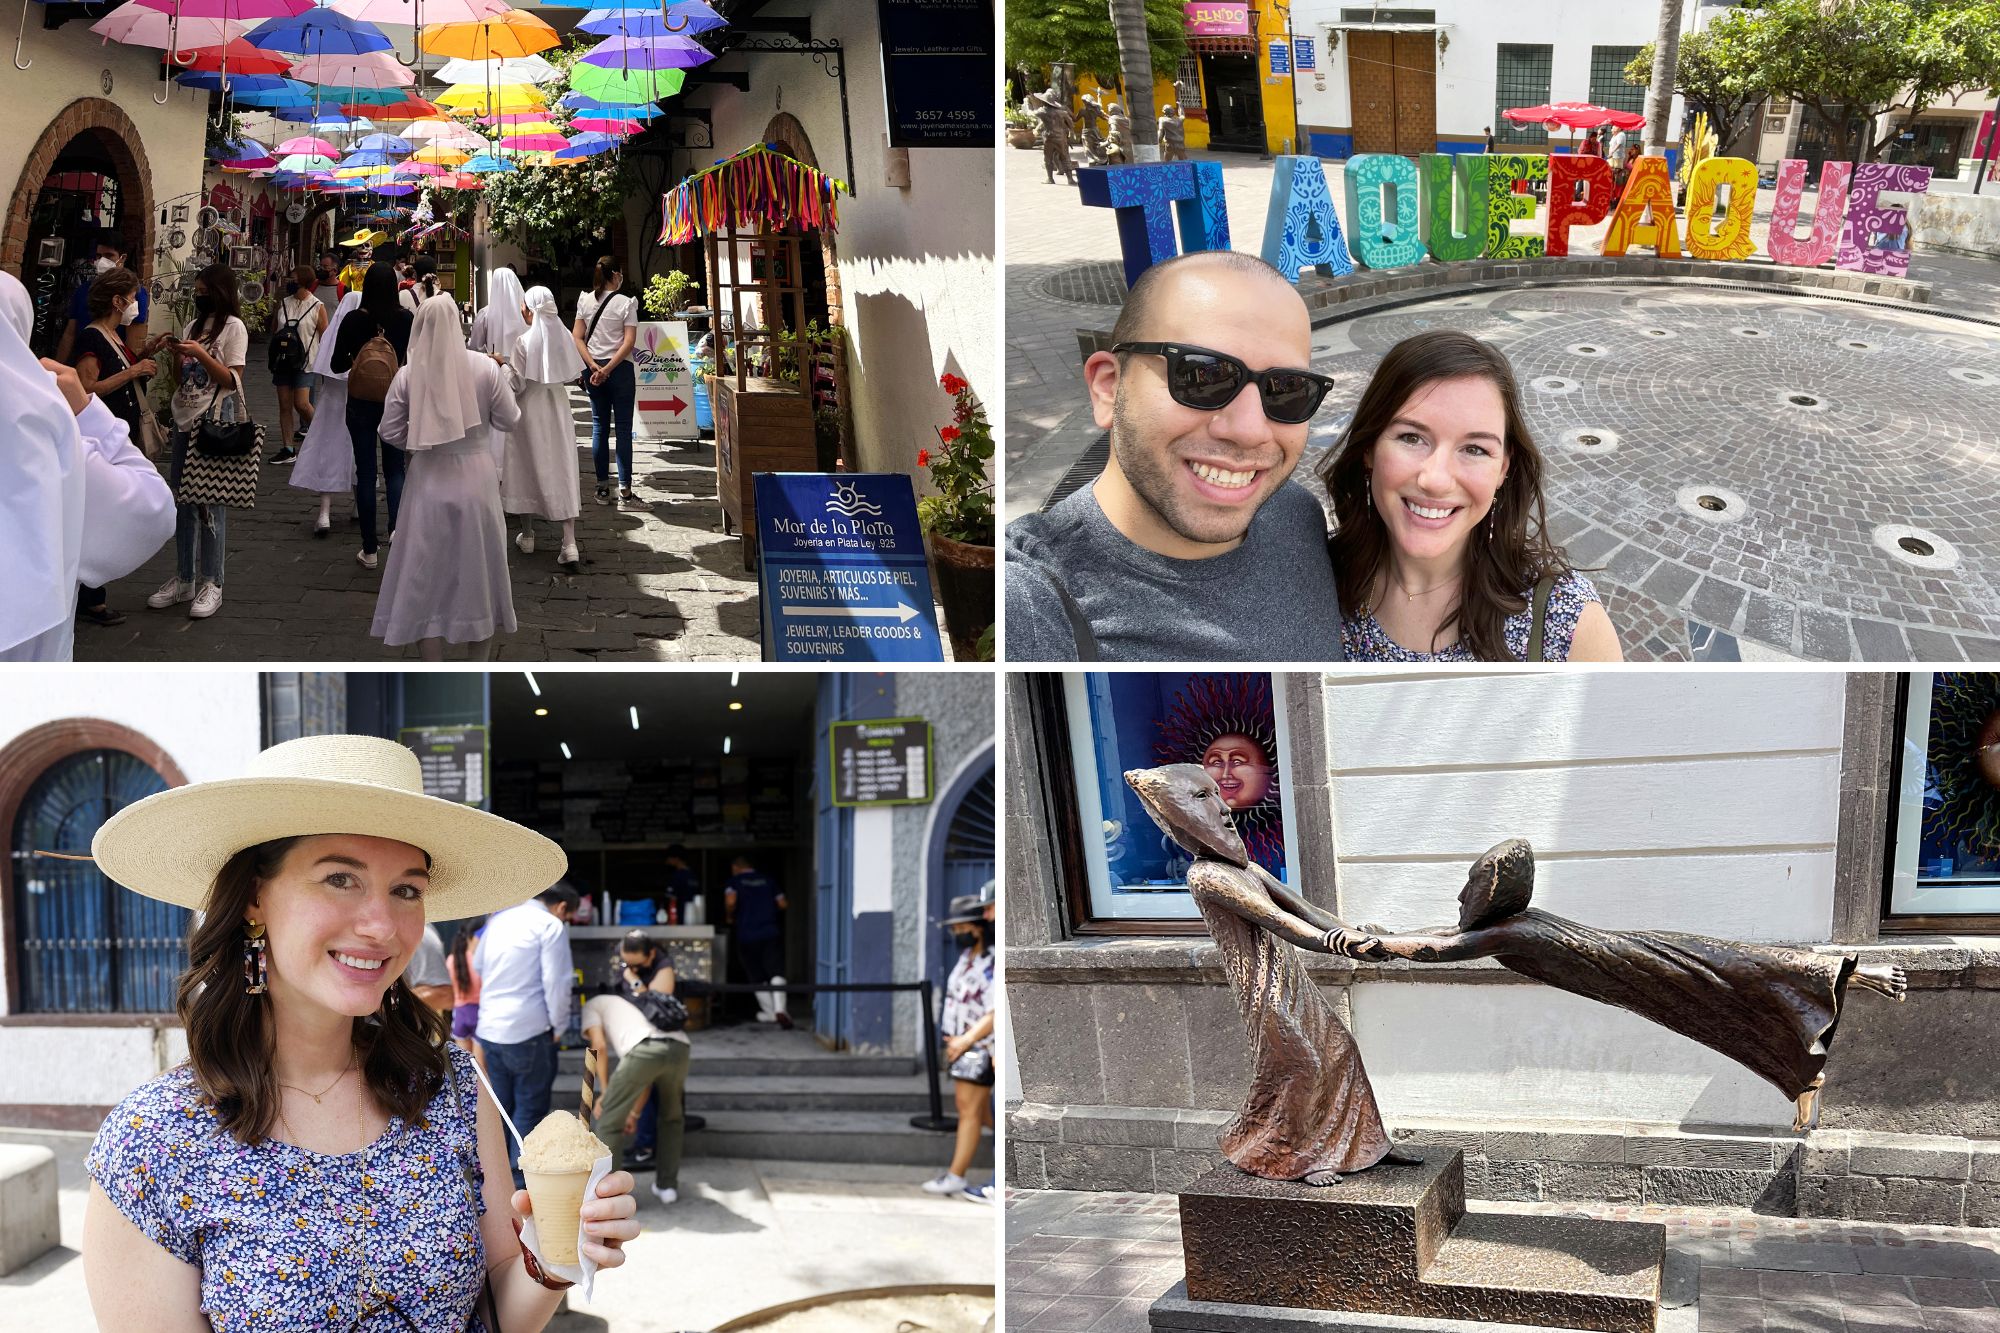 Collage: Nuns in Tlaquepaque, Alyssa and Michael in front of the Tlaquepaque sign, Alyssa with a nieve, and a statue